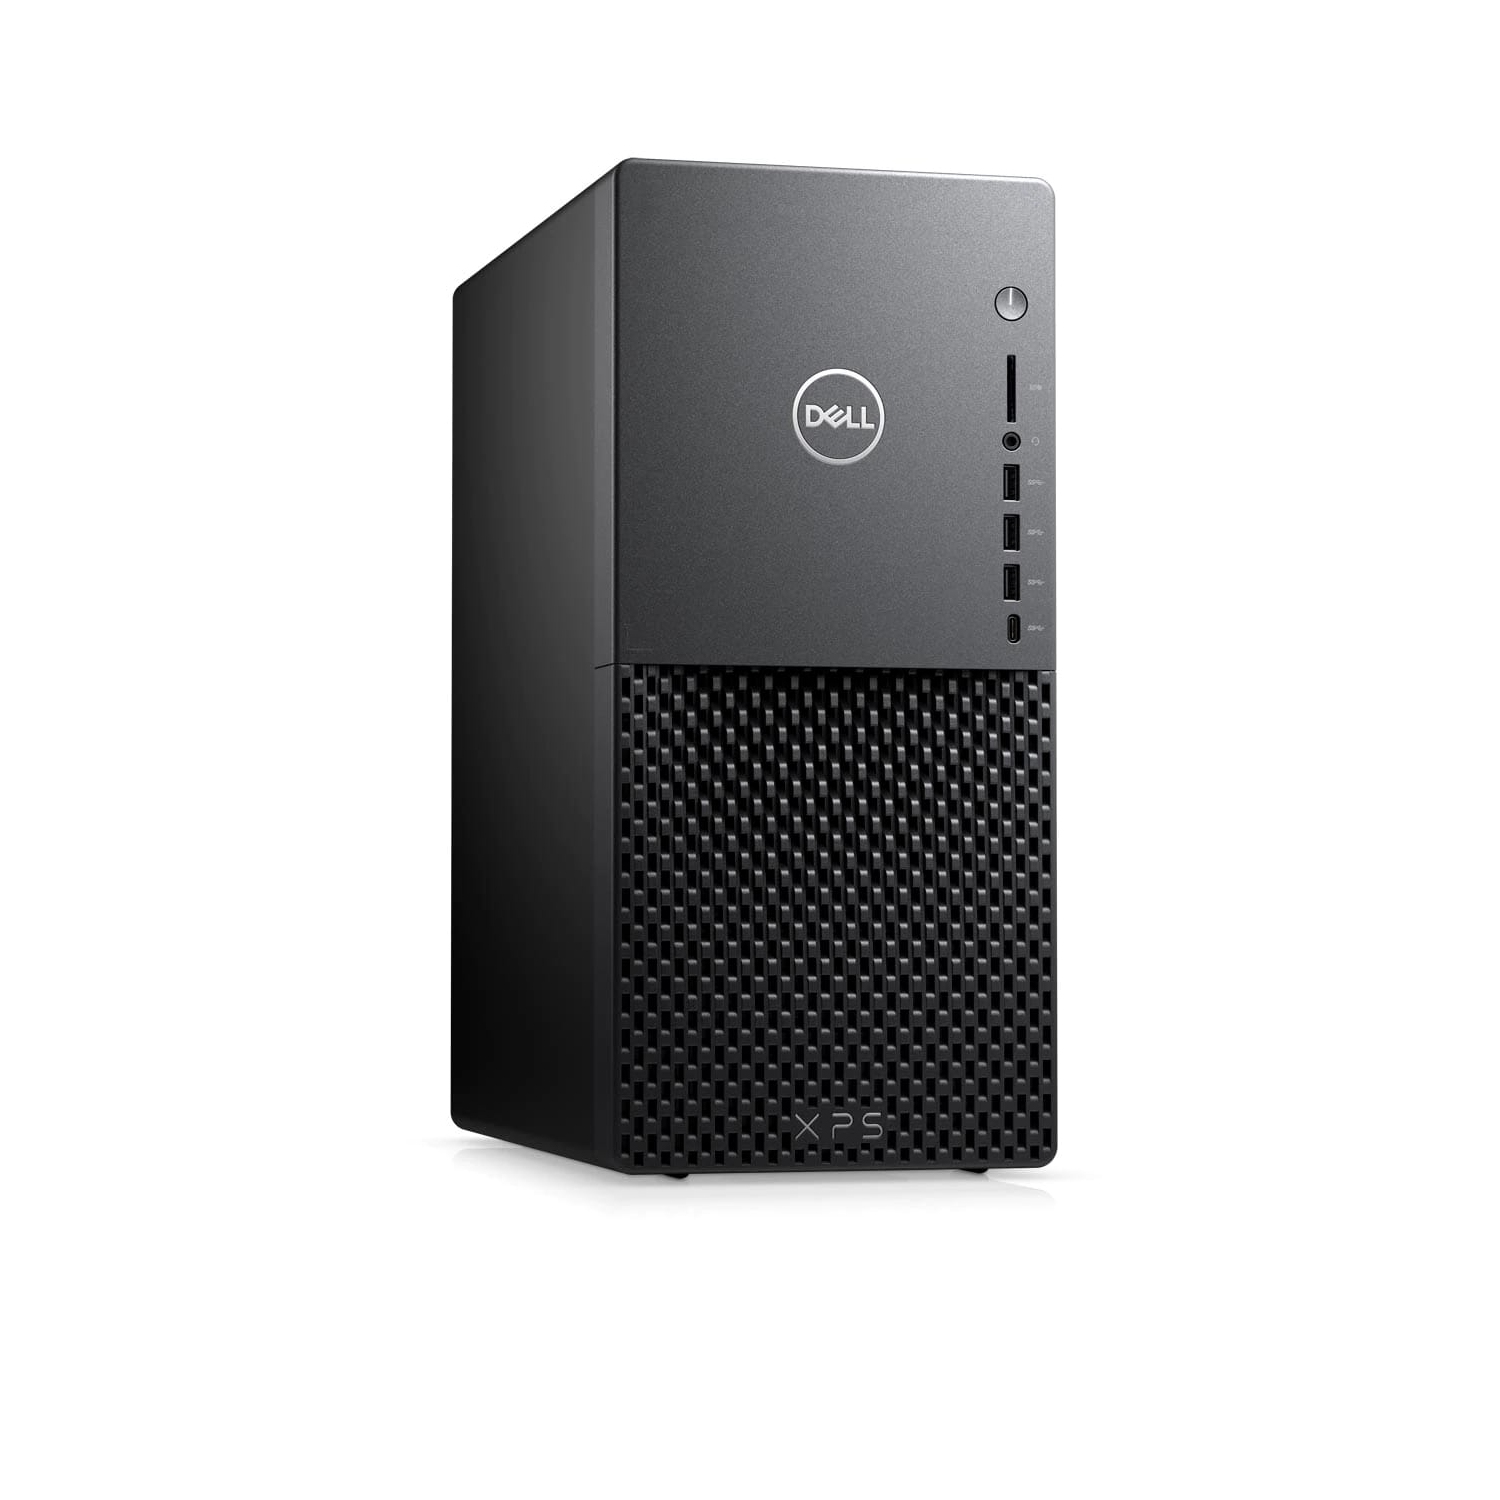 Refurbished (Excellent) - Dell XPS 8940 Desktop (2020) | Core i9 - 2TB HDD - 64GB RAM - RTX 3070 | 8 Cores @ 5.3 GHz - 11th Gen CPU Certified Refurbished